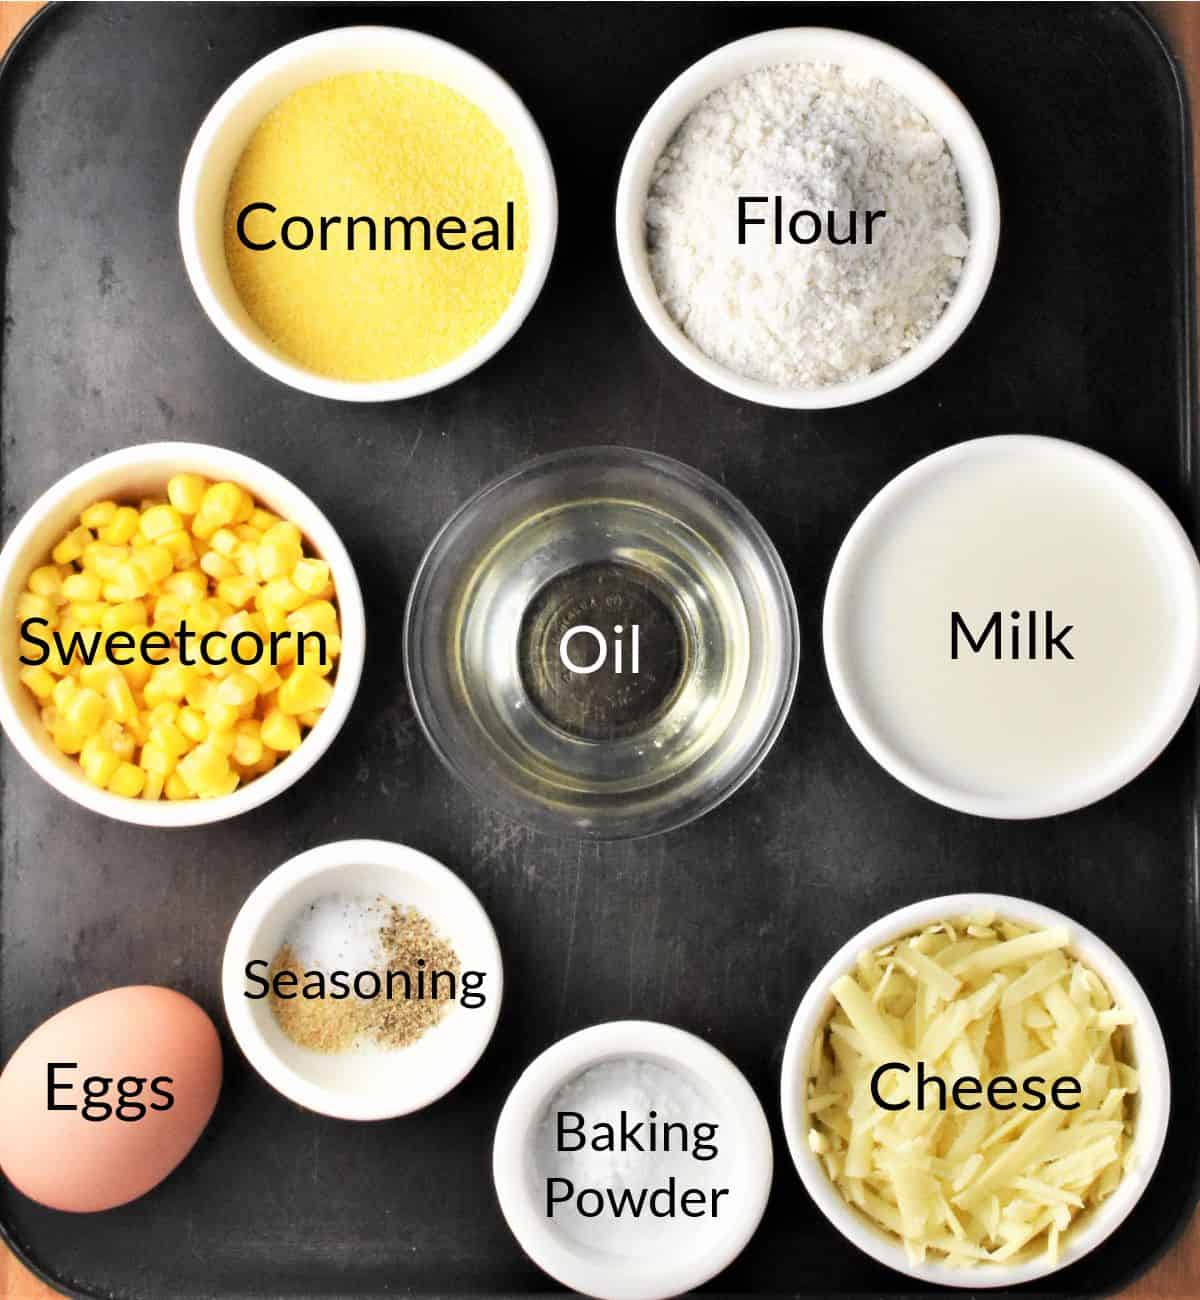 Ingredients for making cornmeal muffins with corn in individual dishes.